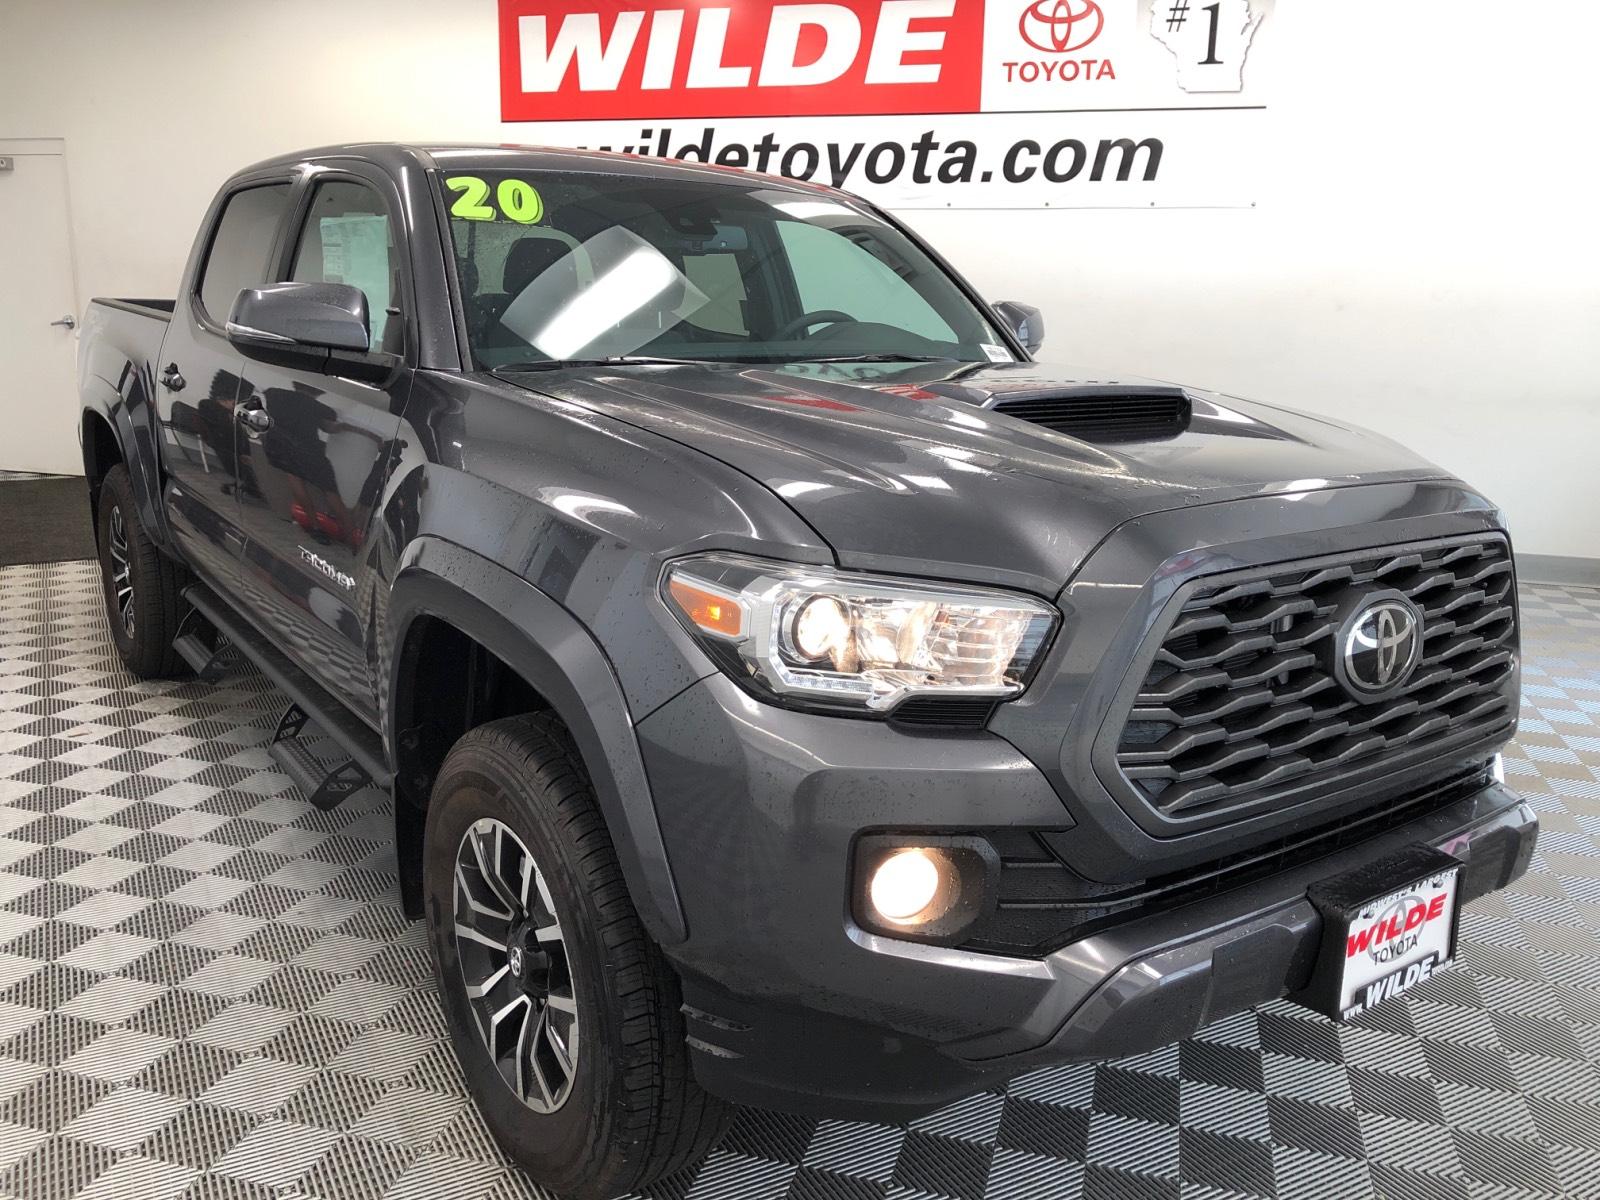 New 2020 Toyota Tacoma Trd Sport Double Cab 5 Bed V6 Mt Crew Cab Pickup In West Allis T61752 Wilde Toyota